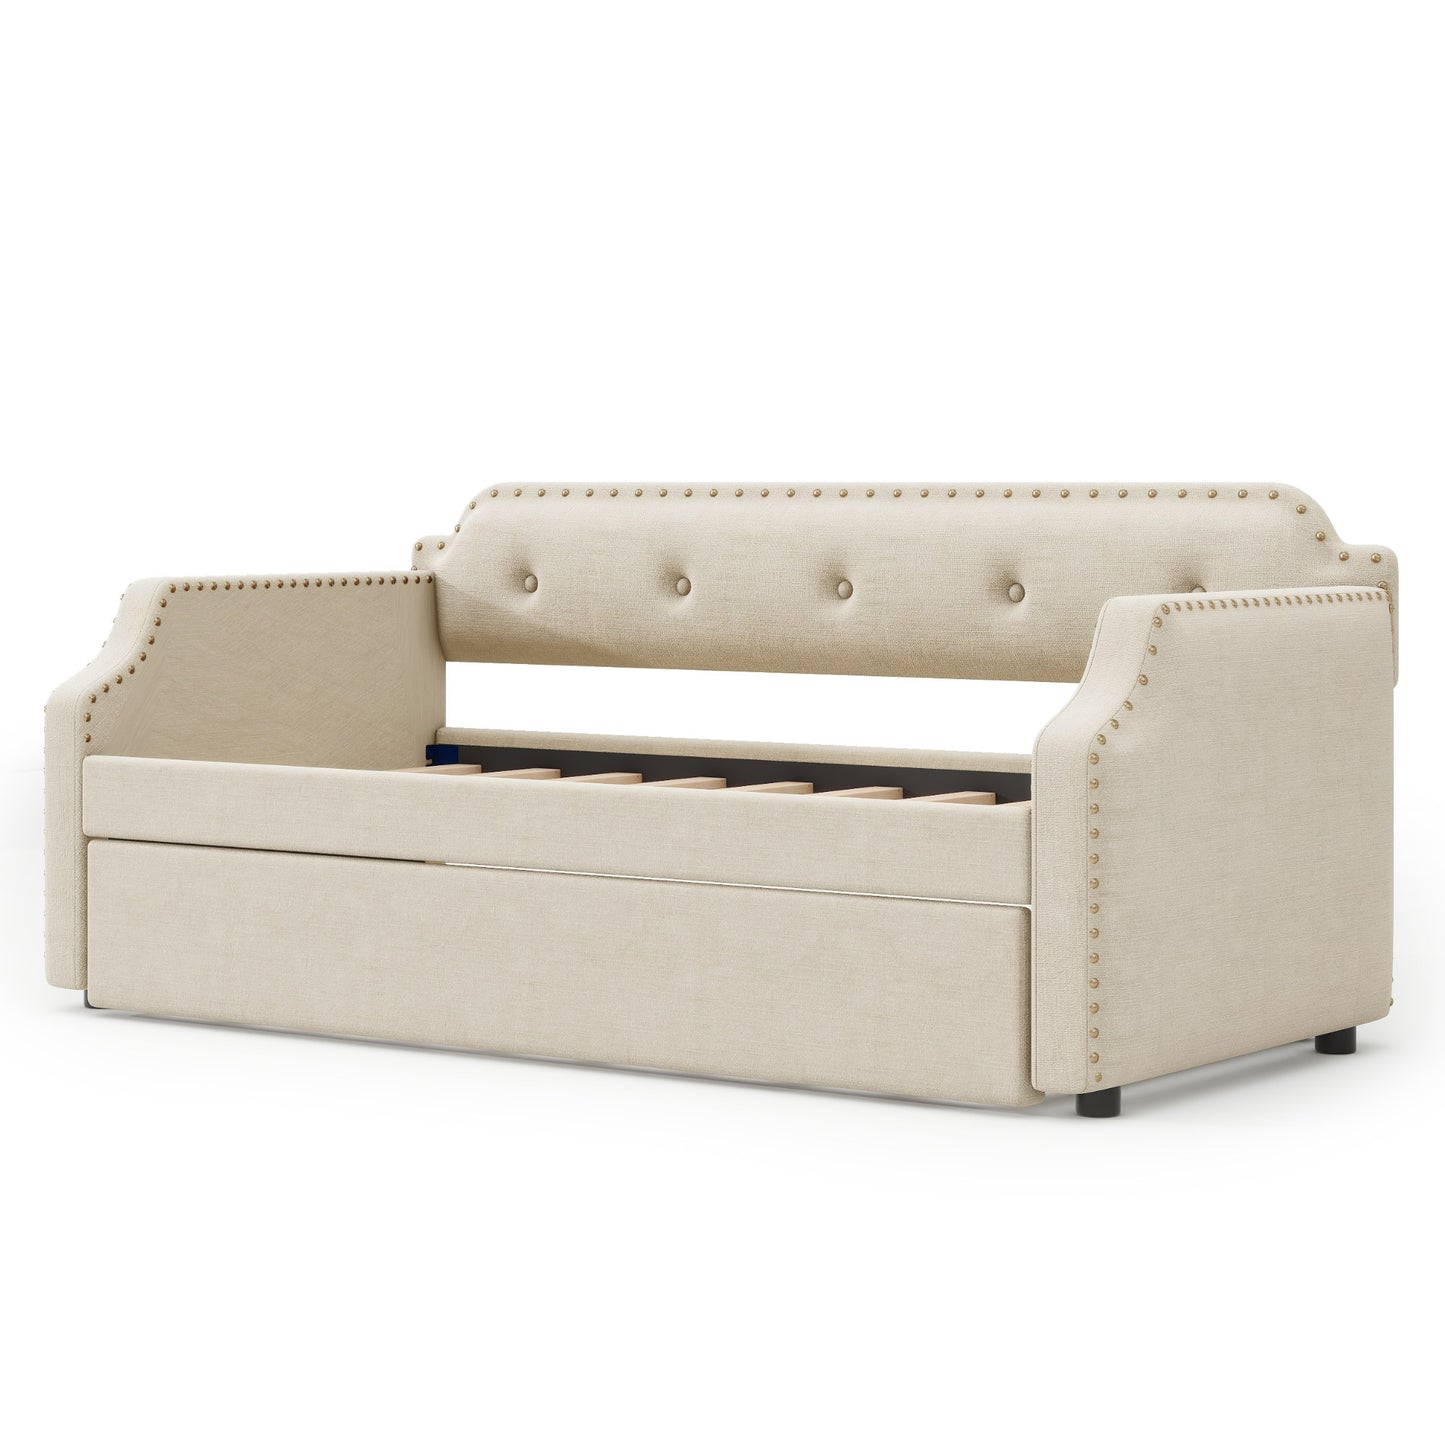 Upholstered Daybed with Trundle, Wood Slat Support,Upholstered Frame Sofa Bed, Twin, Beige(Expected Arrival Time: 1.23)